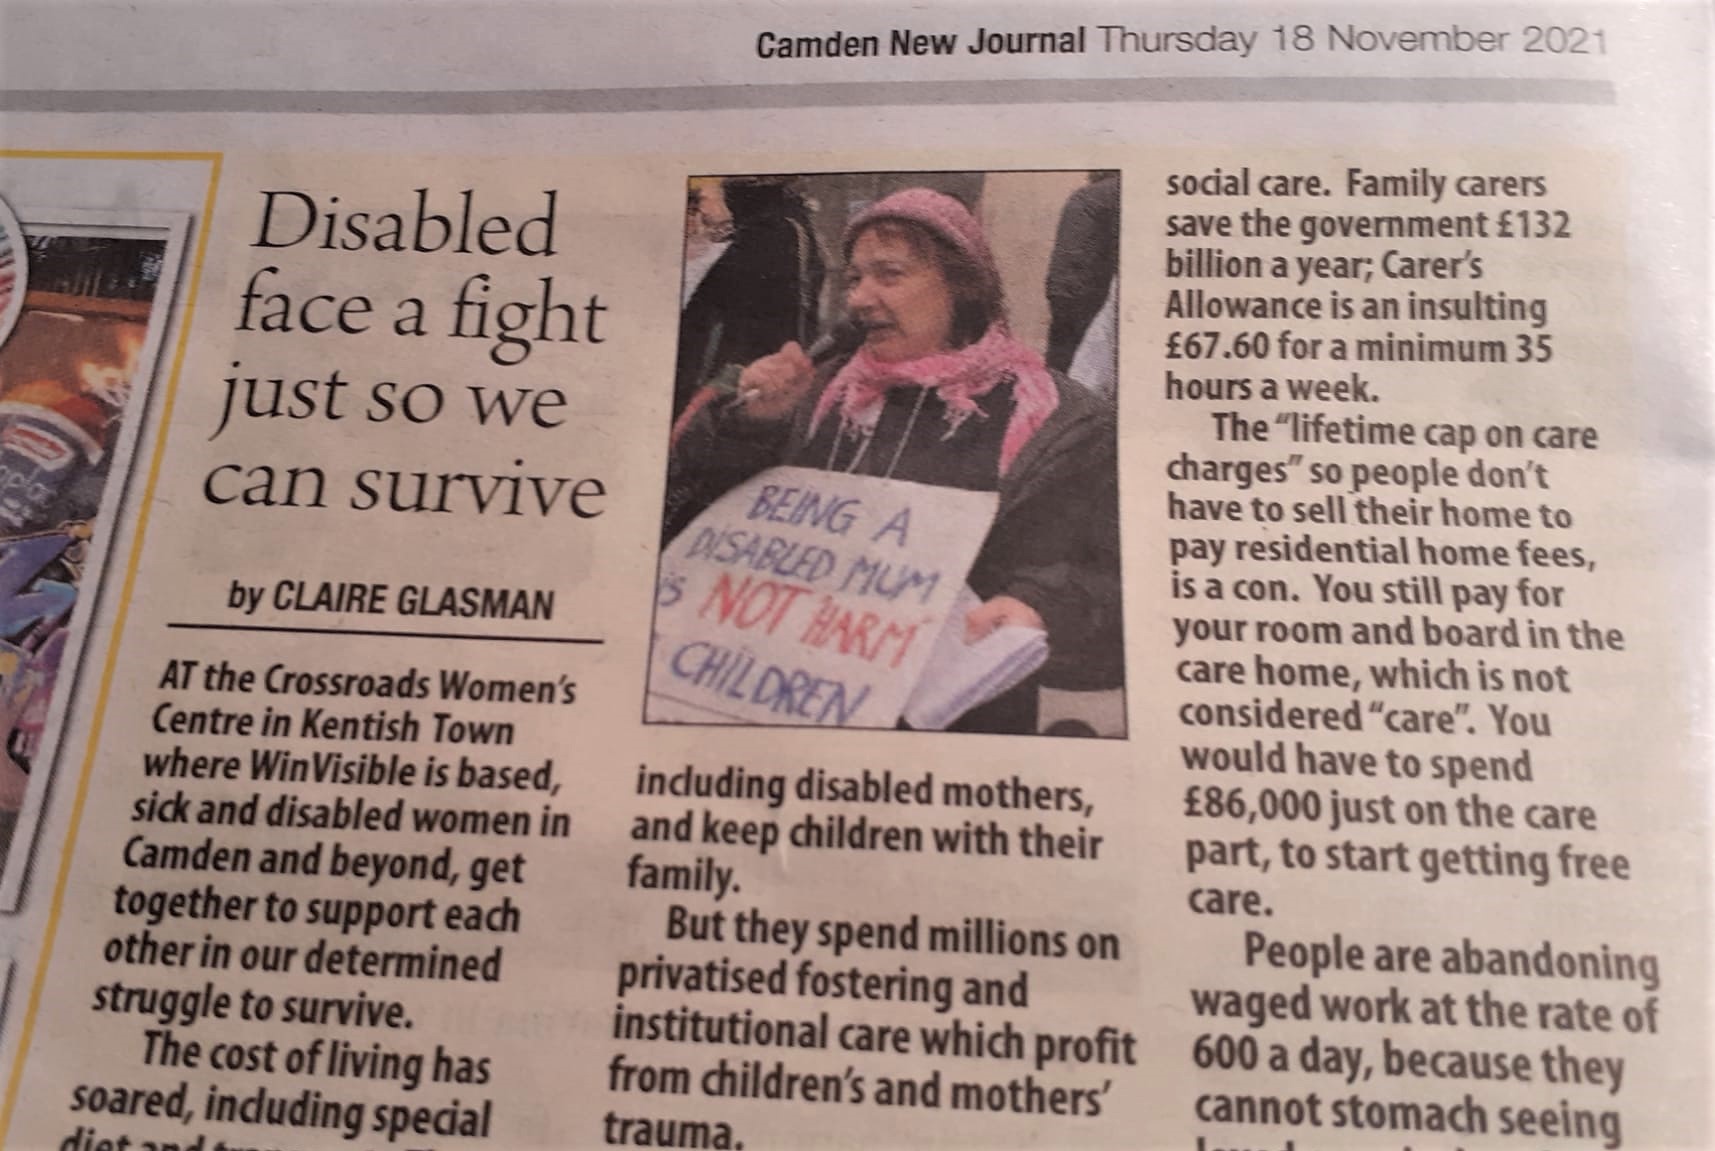 Image of newspaper article in the Camden New Journal.  Photo with article shows a woman speaking on mic and holding placard: Being a disabled mum is NOT "harm" to children.